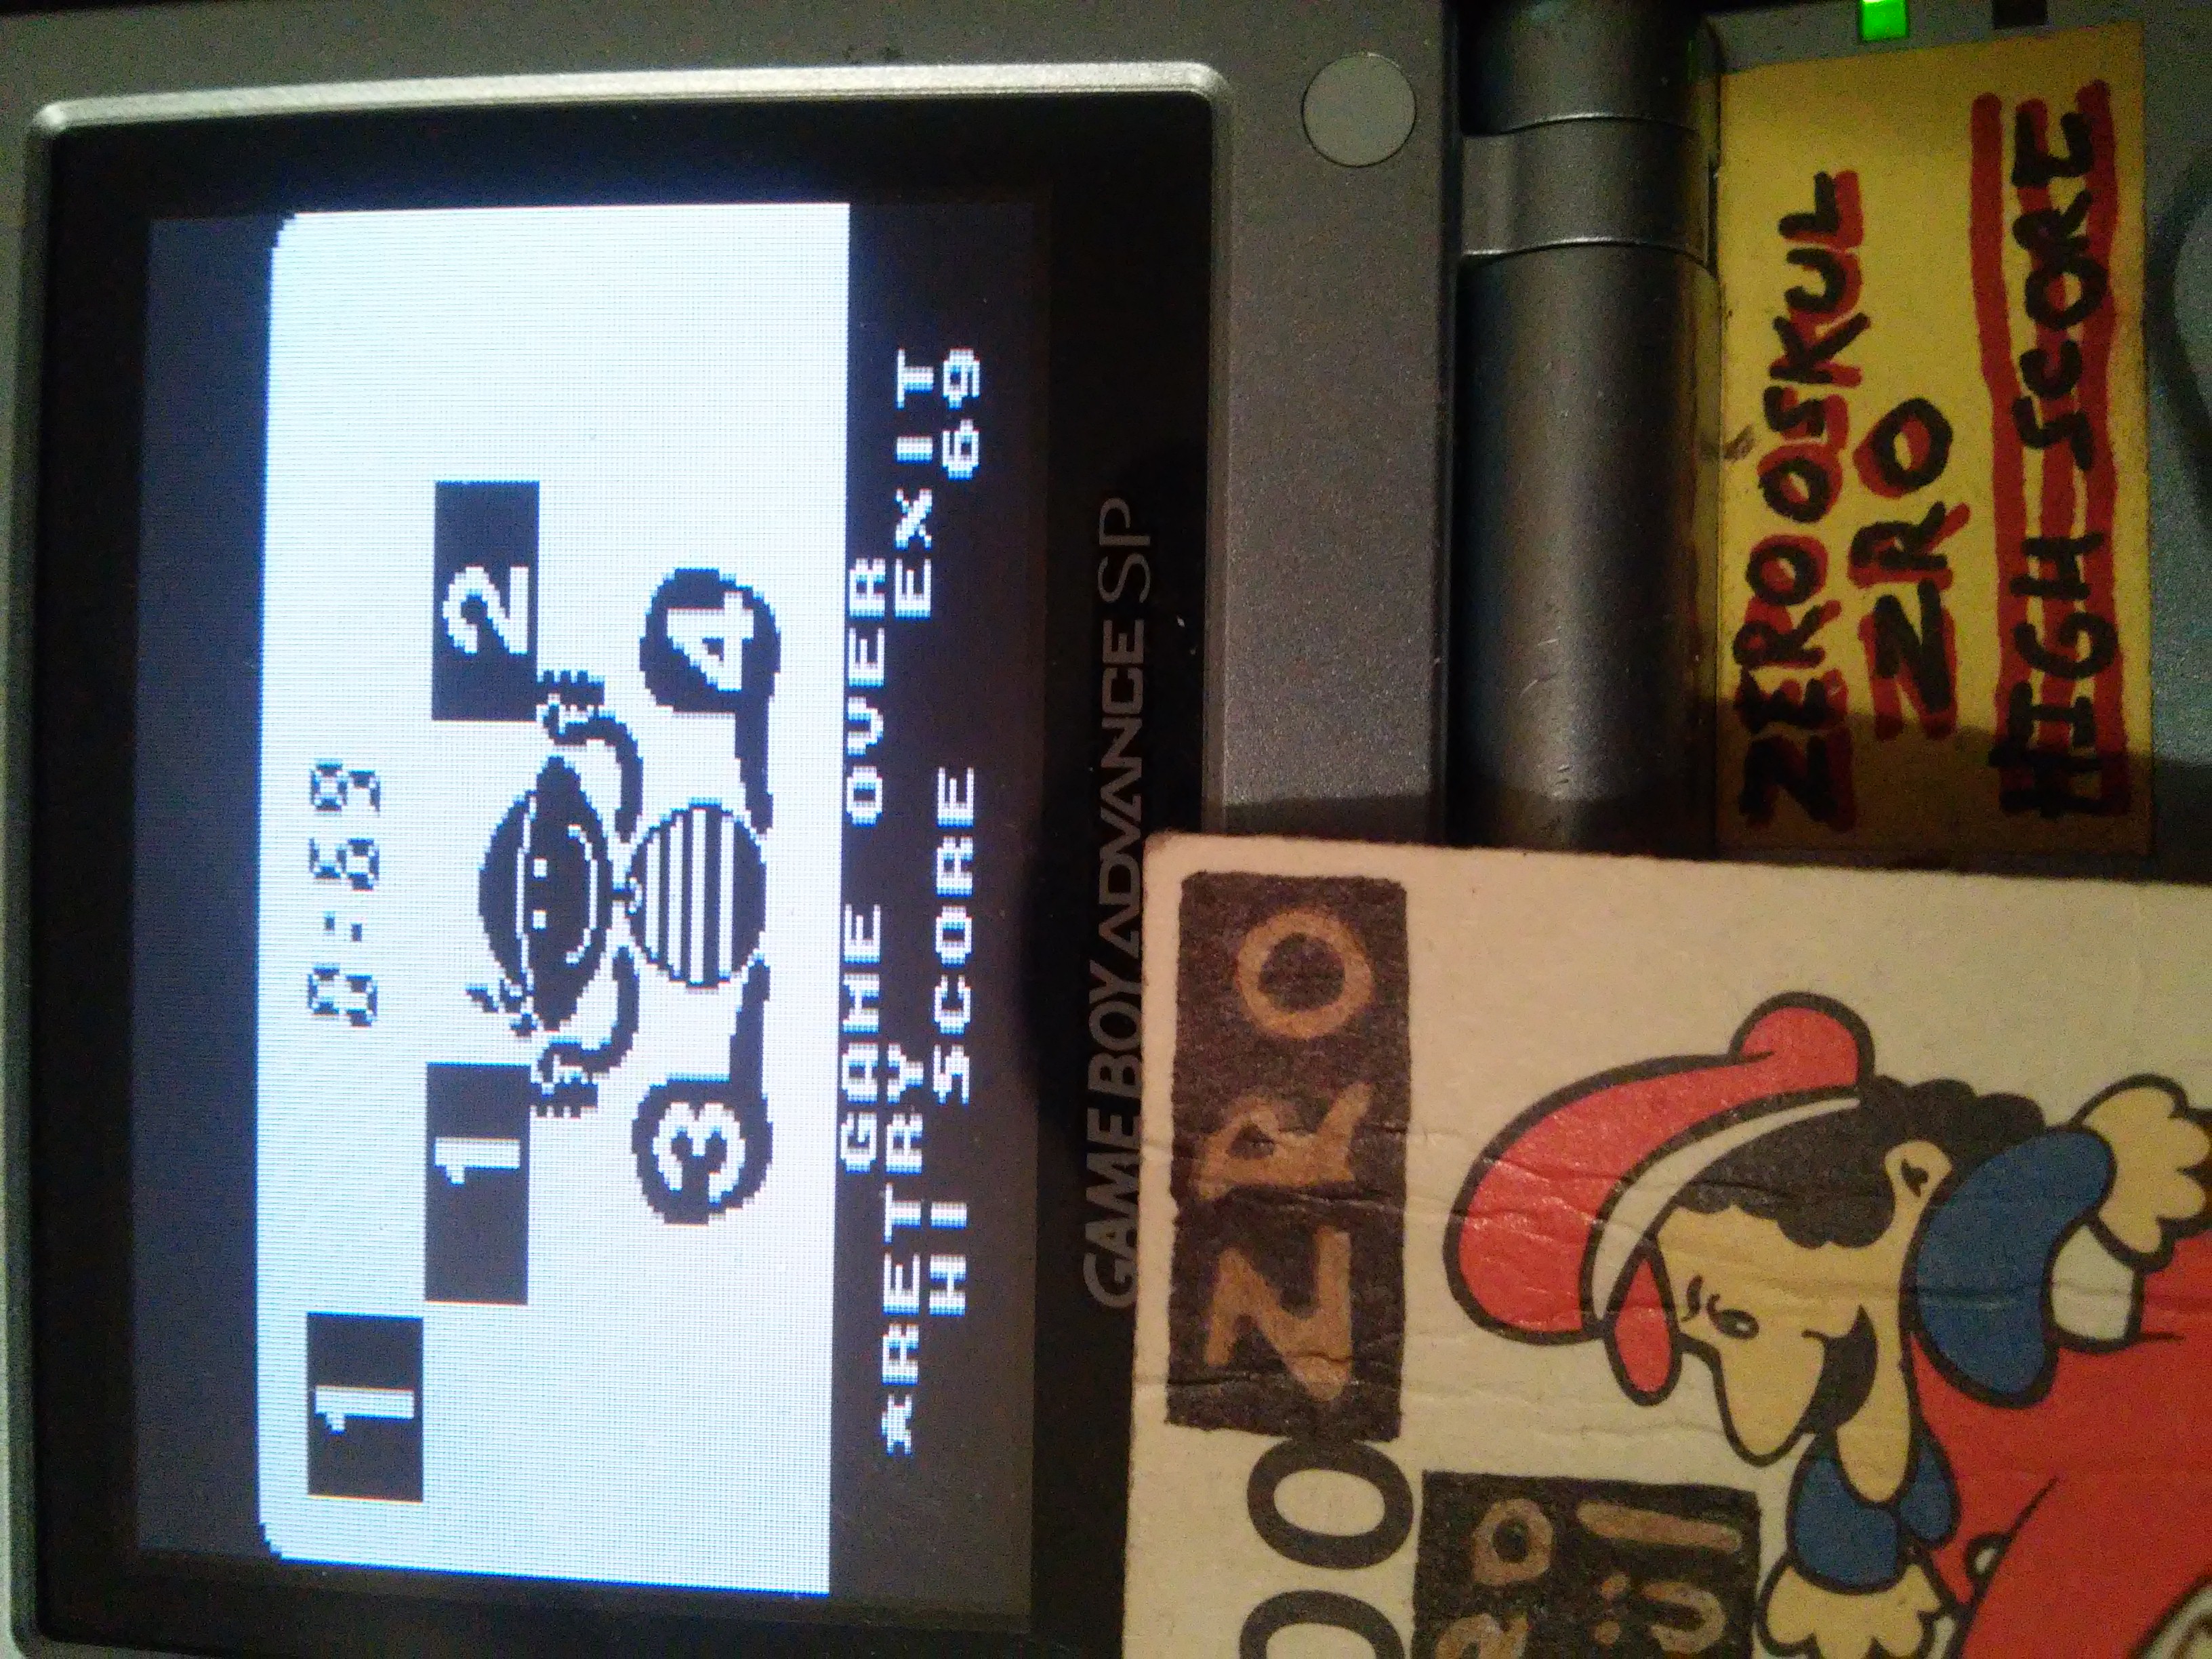 zerooskul: Game & Watch Gallery 3: Flagman [Classic: Game B] (Game Boy Color) 69 points on 2019-02-03 16:04:47